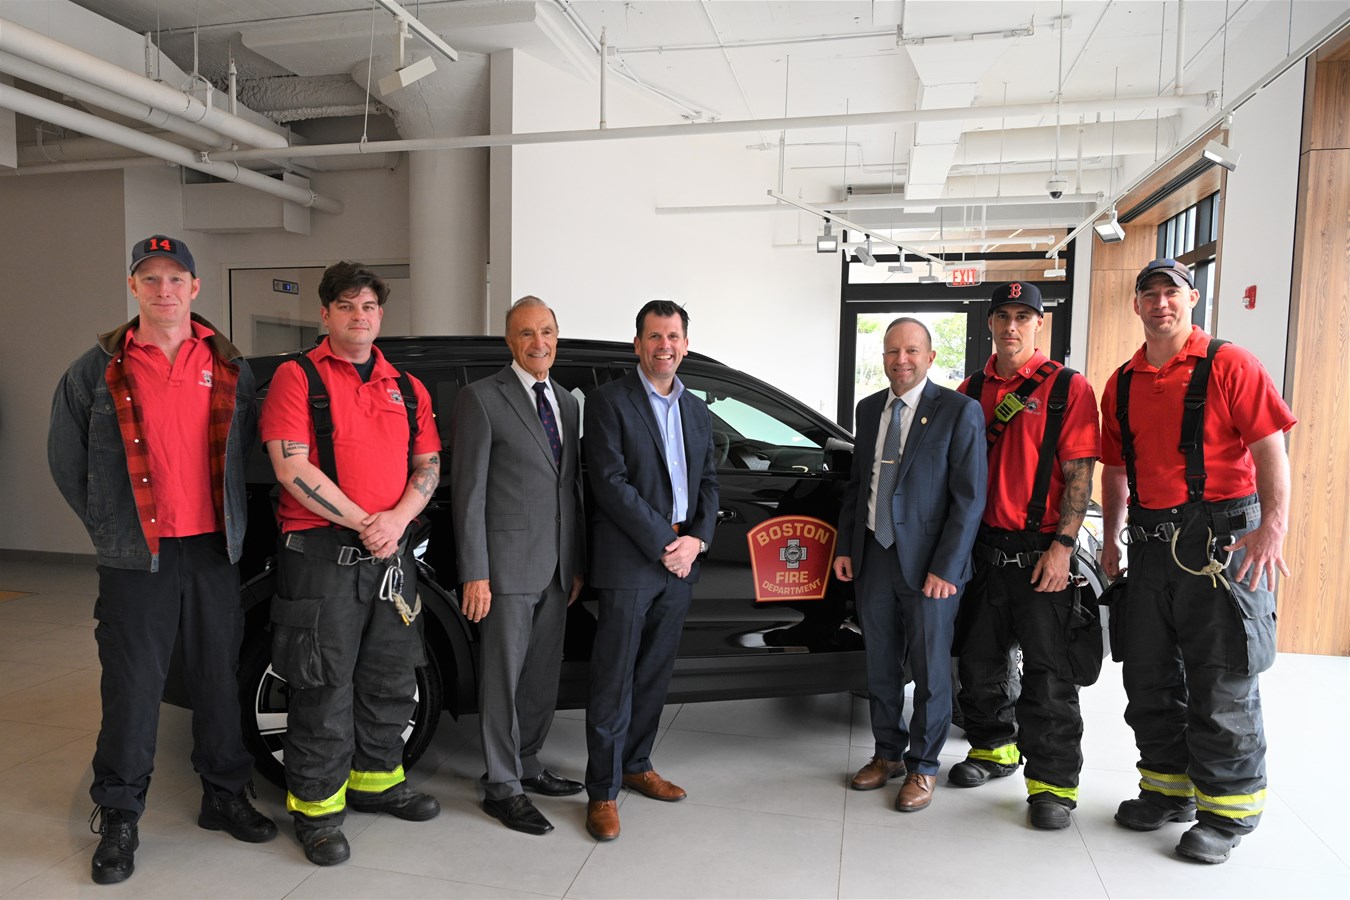 Eric Miller, Vice President Northeast Region, Volvo Car USA, center, with Jack Dempsey, Boston Fire Department Fire Commissioner (right) and Ray Ciccolo, Founder, Village Automotive Group (left), at Boston Volvo Cars in Allston with members of the Boston Fire Department and the Volvo XC40 Recharge electric SUV the company provided for rescue training.